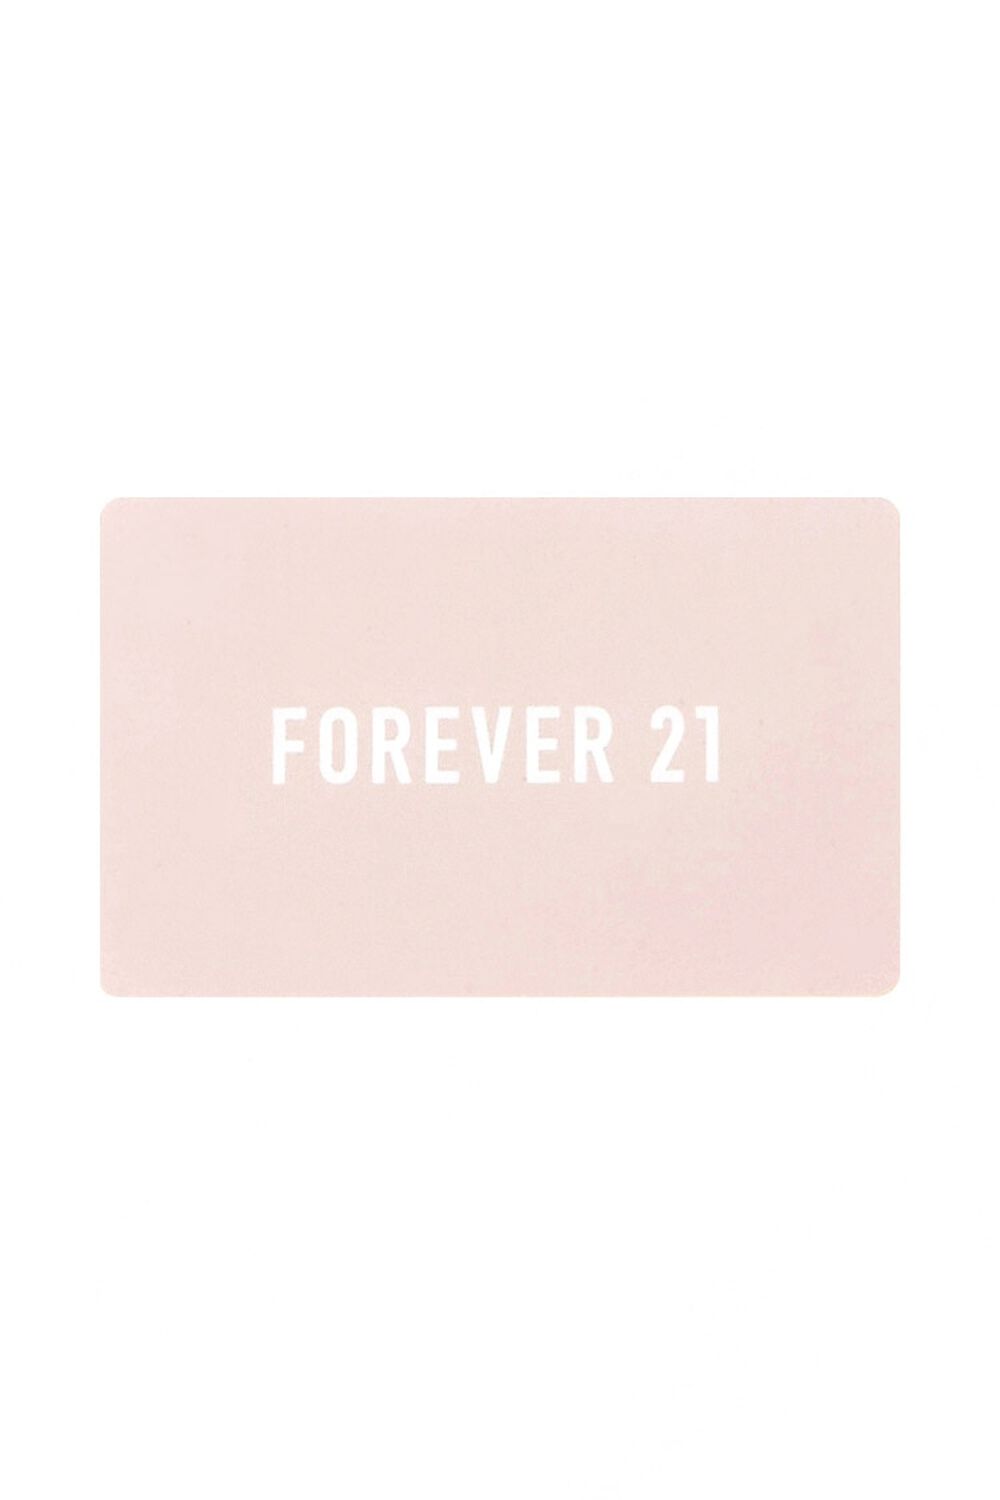 PINK MARBLE Forever 21 Gift Card, image 1